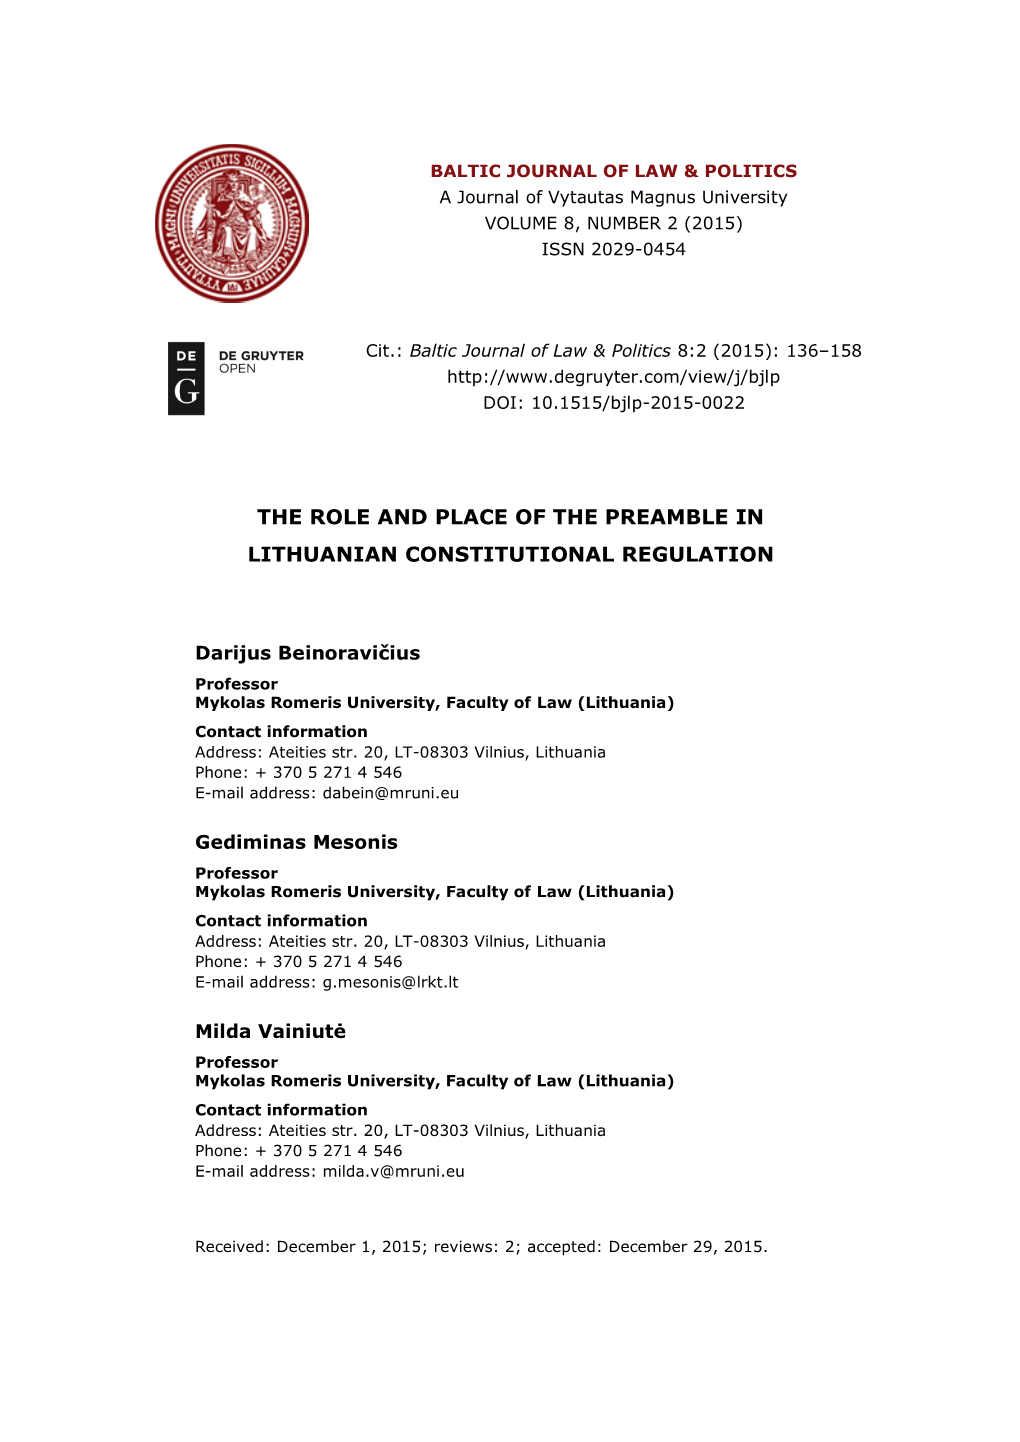 The Role and Place of the Preamble in Lithuanian Constitutional Regulation